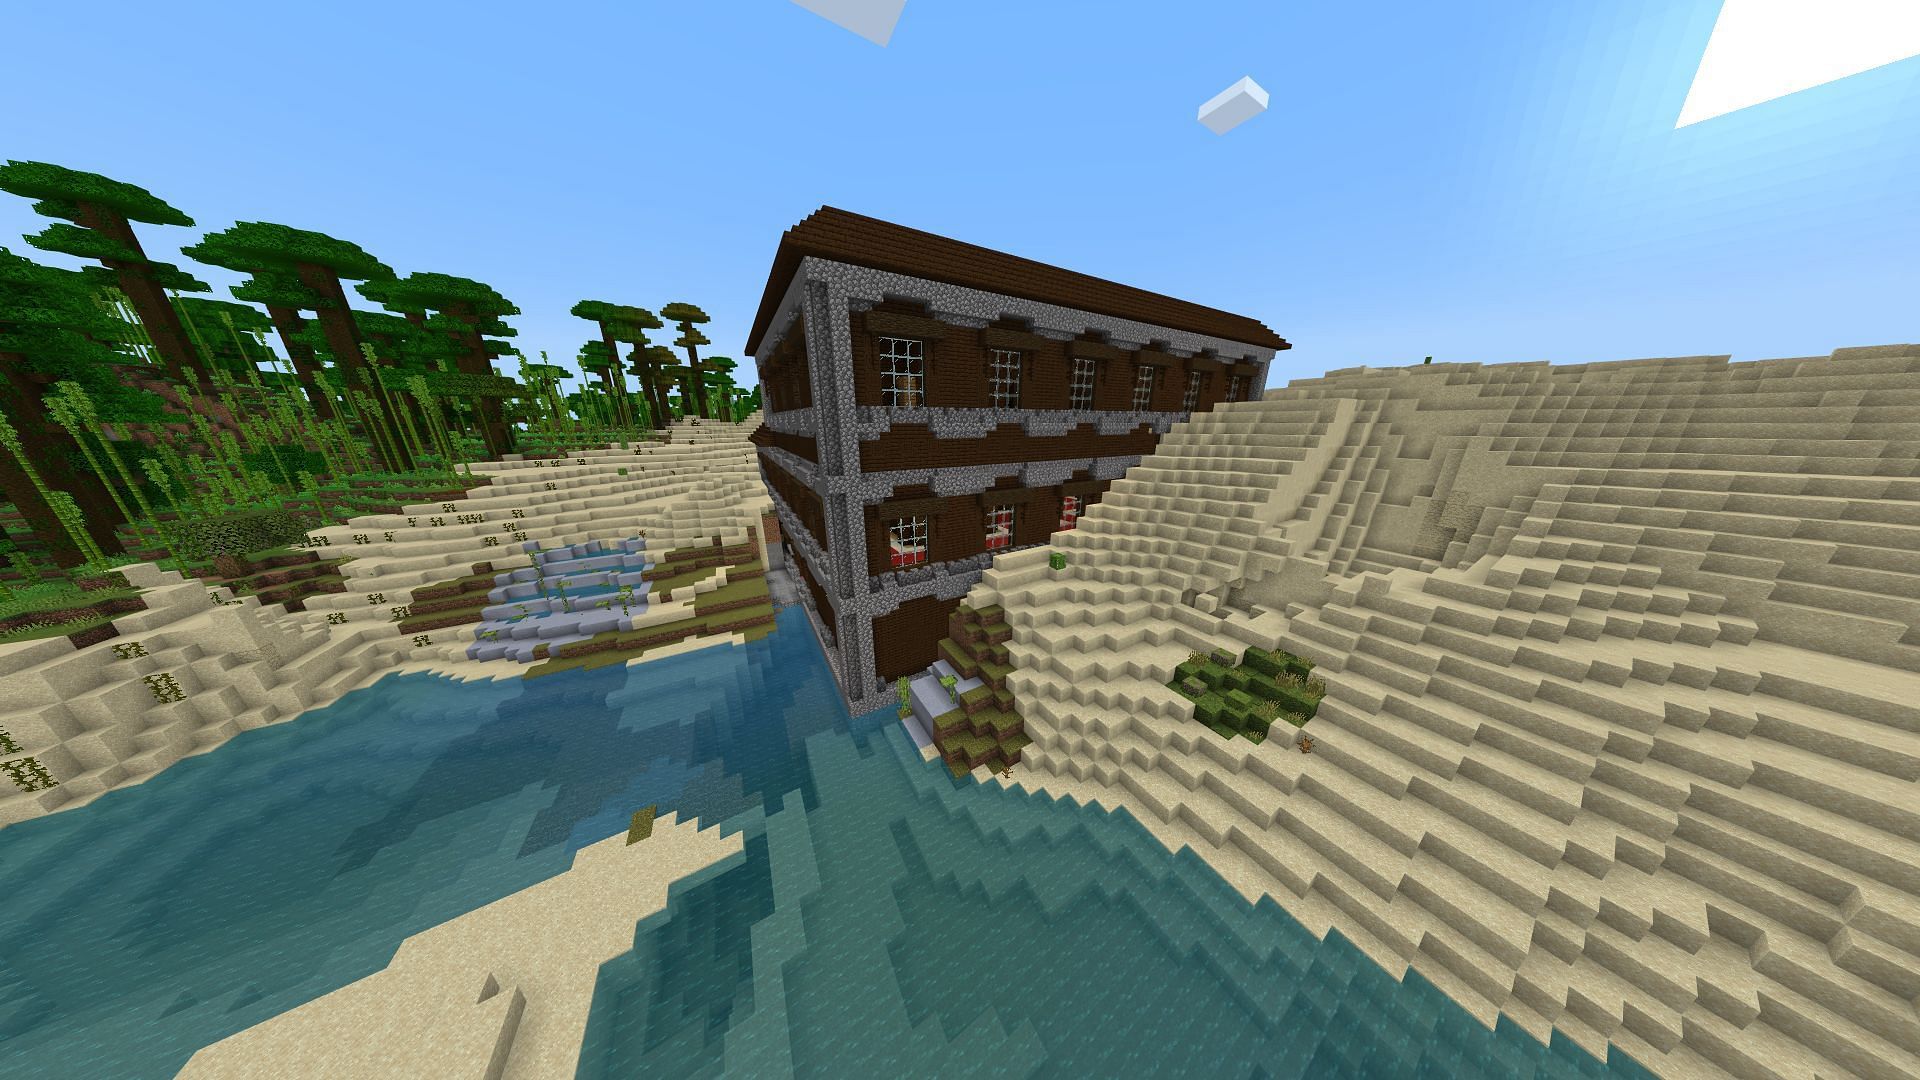 The woodland mansion in this Minecraft desert seed is oddly out of place (Image via EquivalentBroccoli57/Reddit)